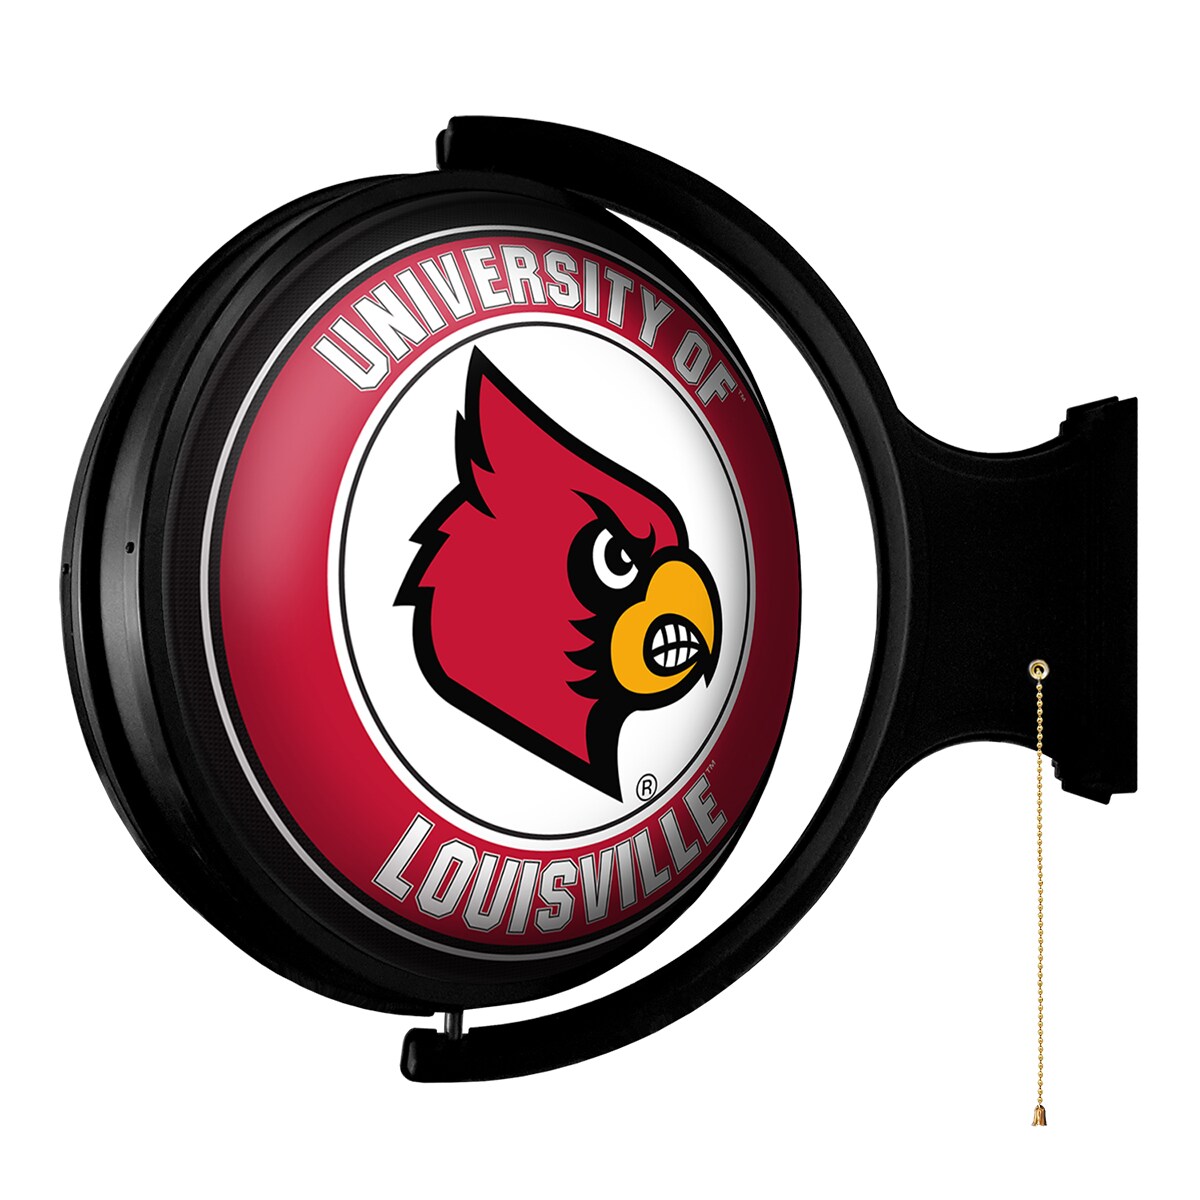 You the Fan Louisville Cardinals 3D Picture Frame